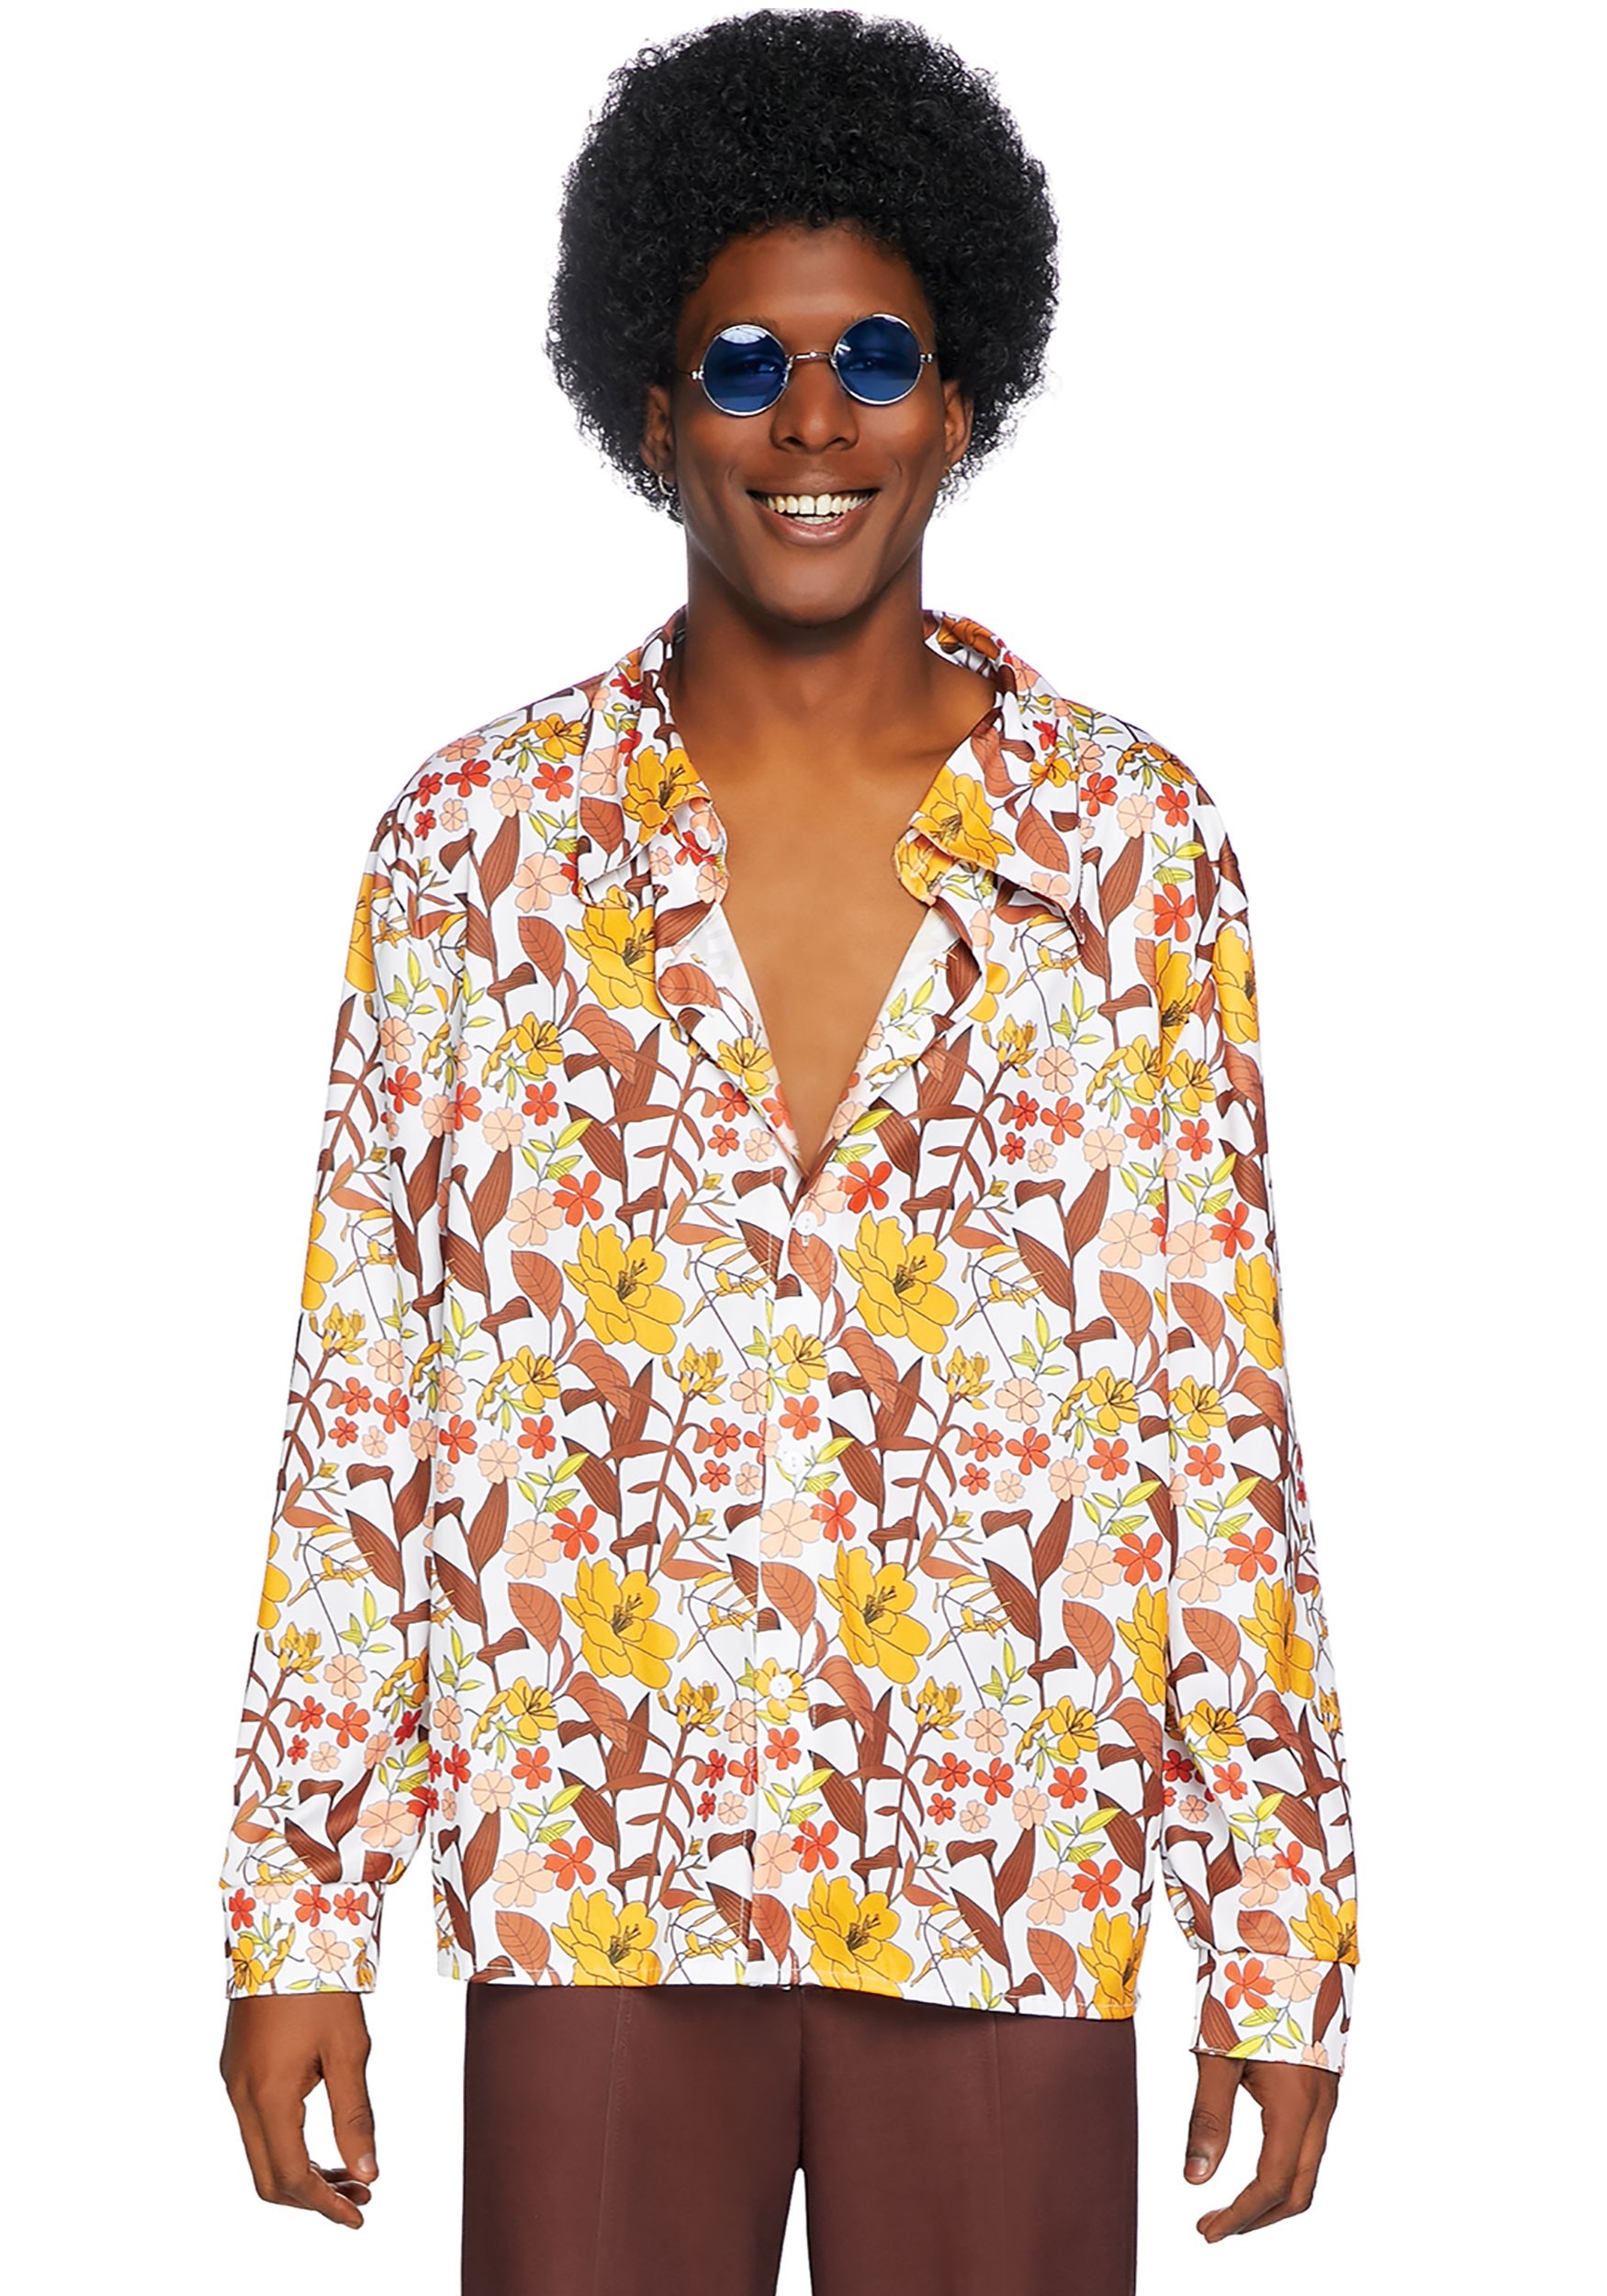 https://images.halloweencostumes.ca/products/58021/1-1/mens-70s-floral-shirt.jpg